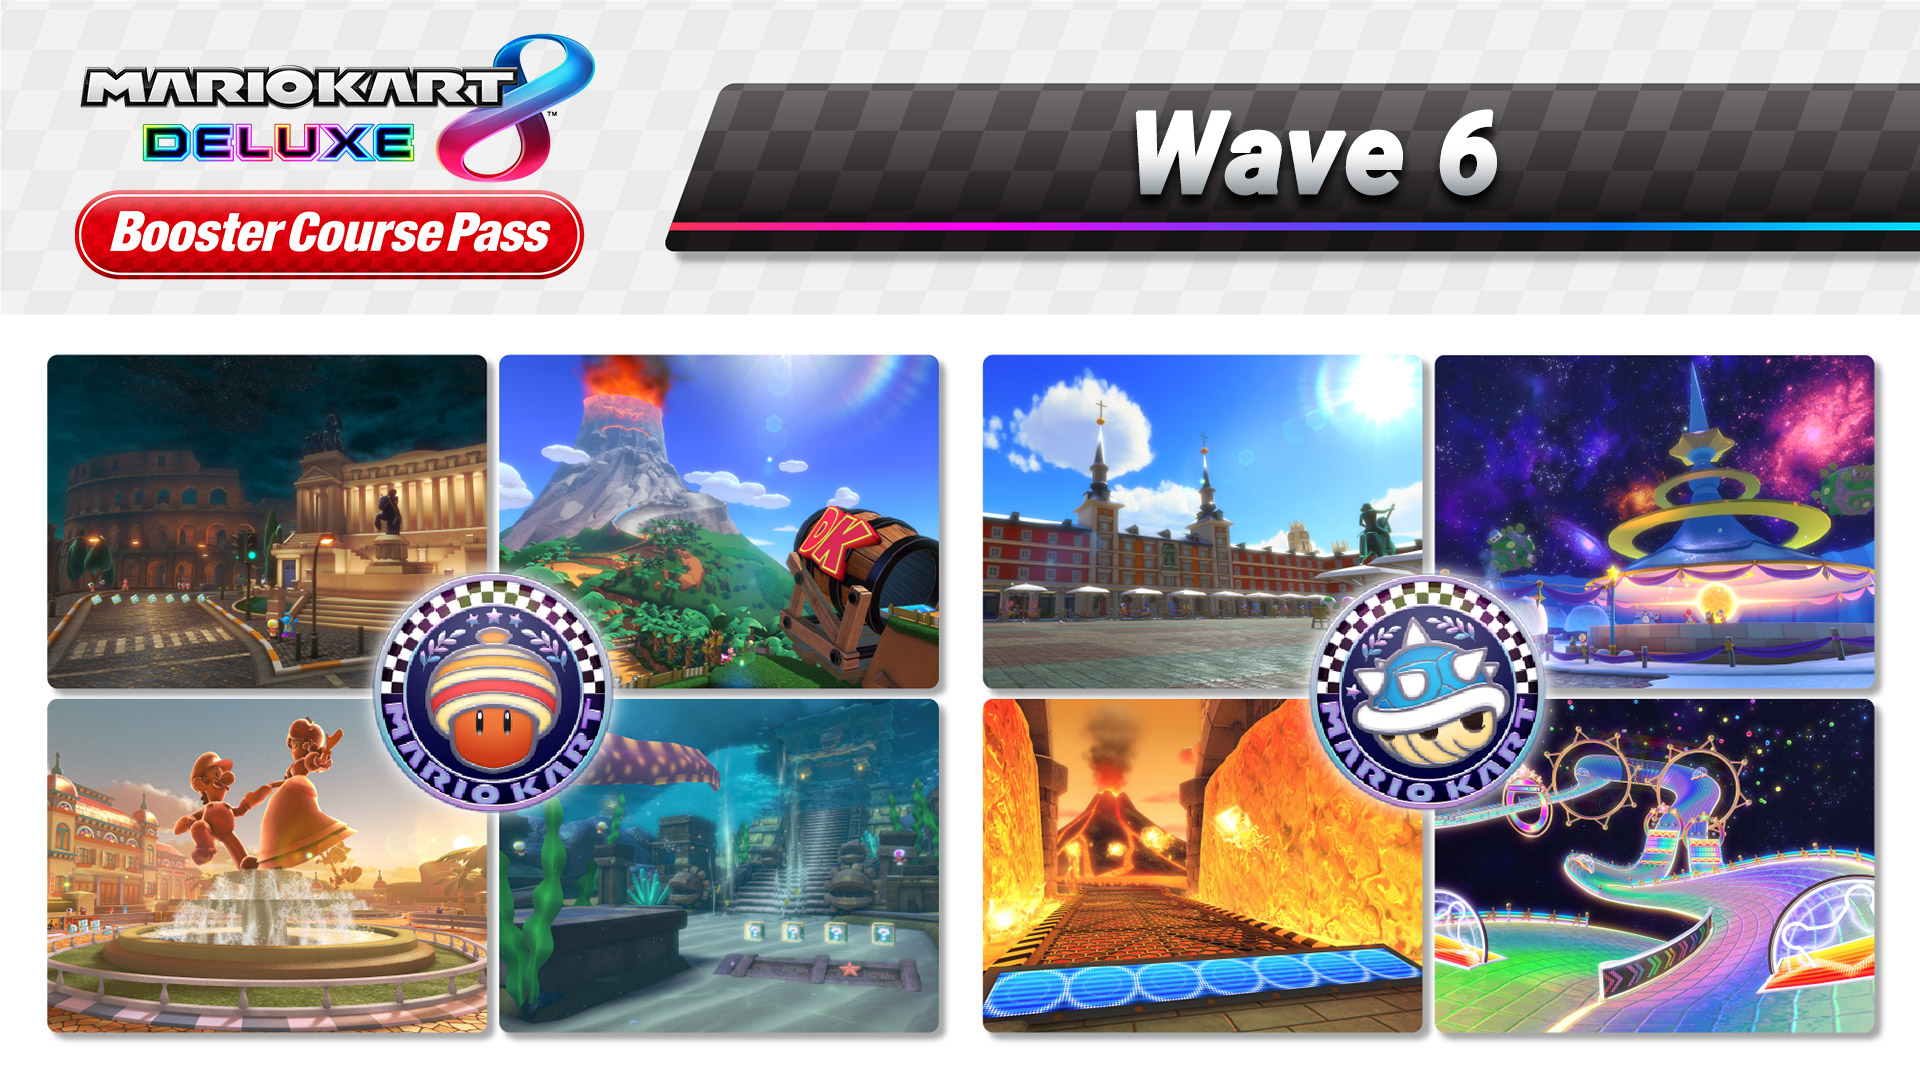 Mario Kart™ 8 Deluxe – Booster Course Pass for Nintendo Switch - Nintendo  Official Site